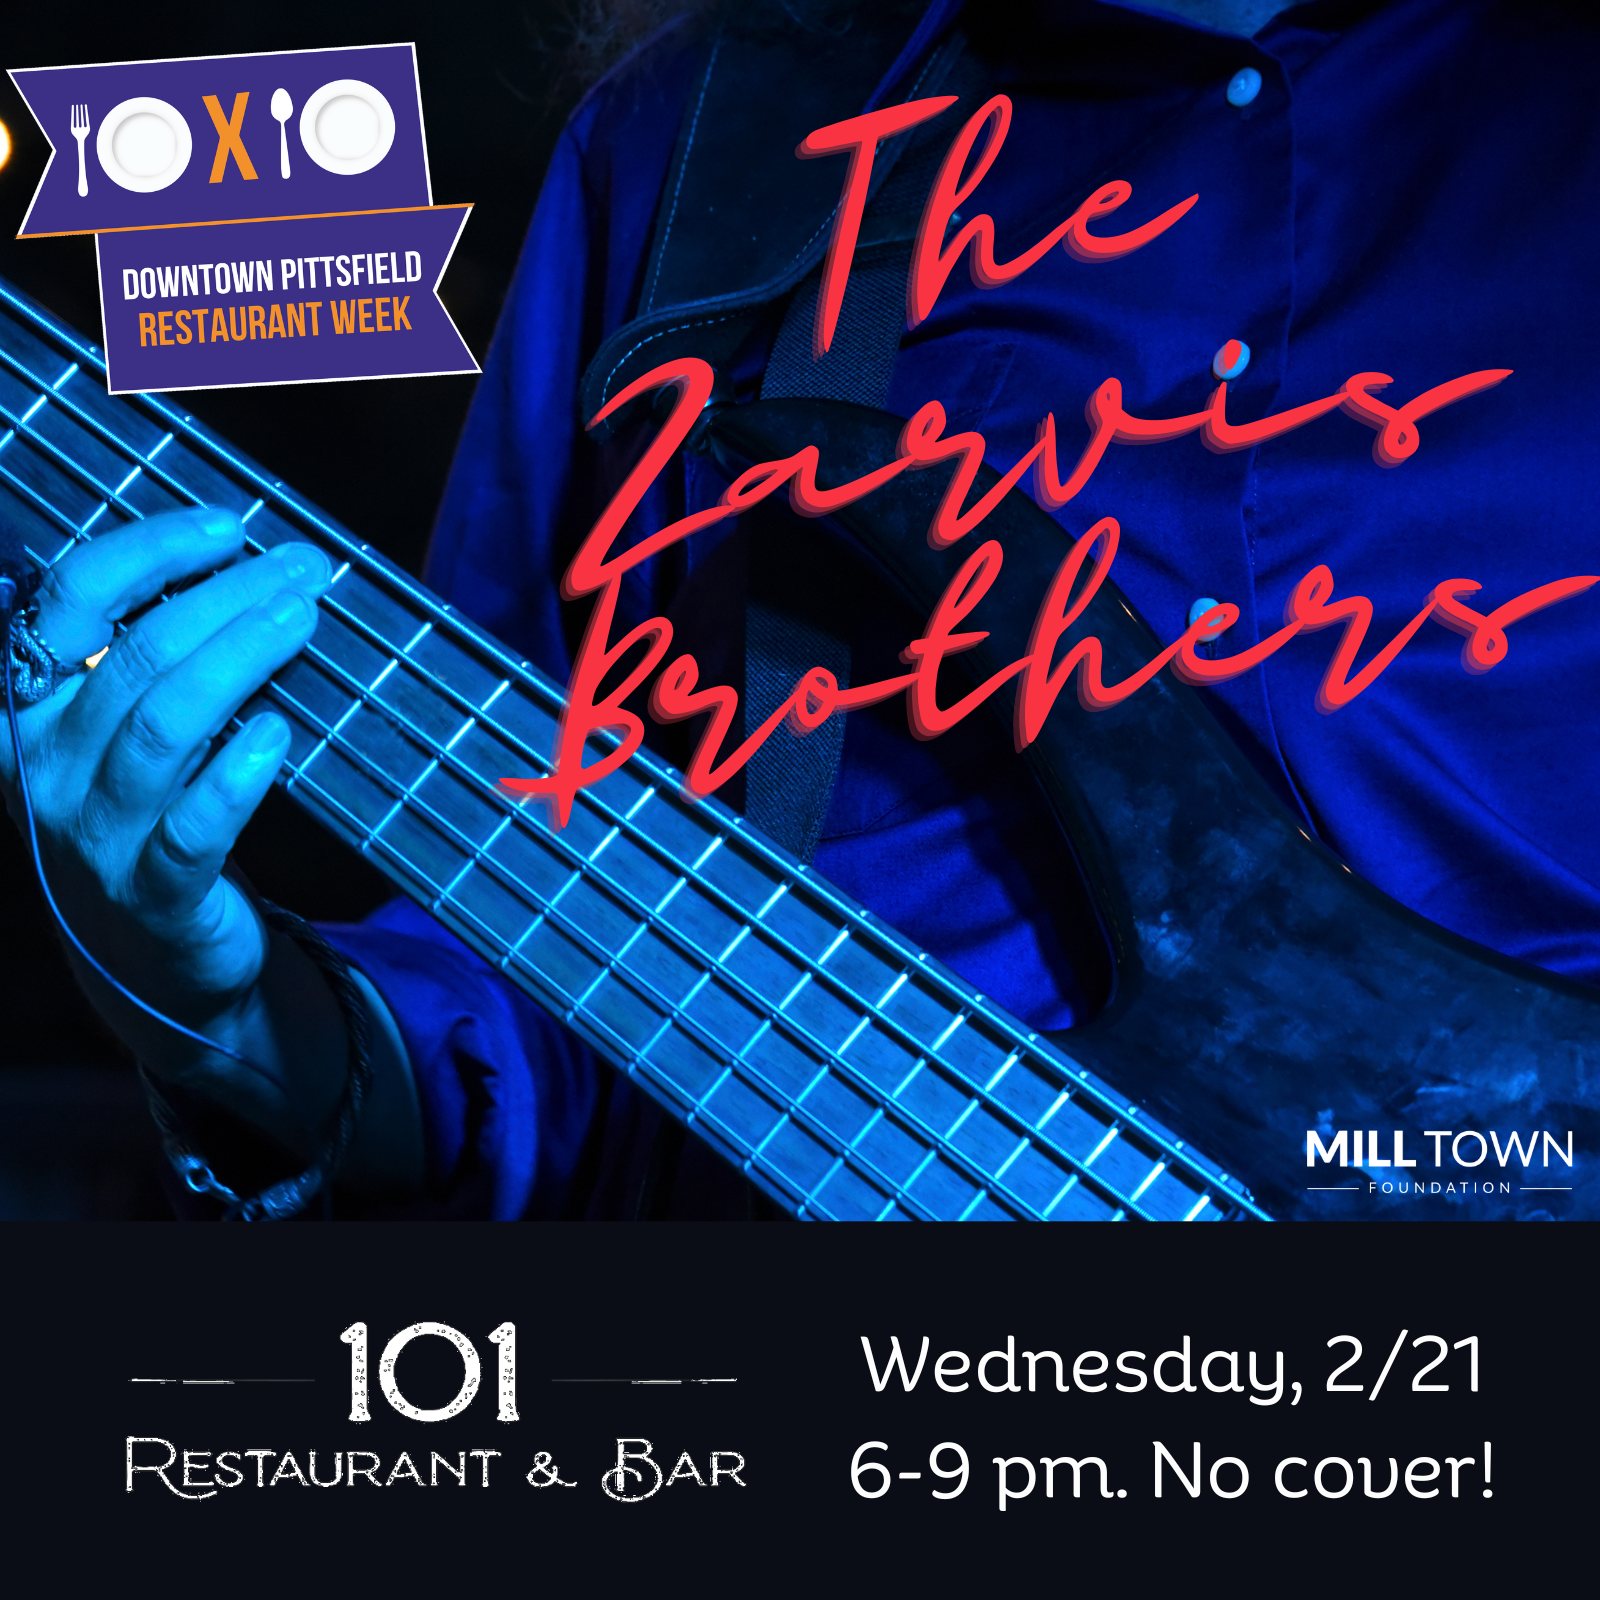 101 Restaurant & Bar will host Live Blues with The Zarvis Brothers on Wednesday, February 21, 6 to 9 pm. There is no cover charge to attend.